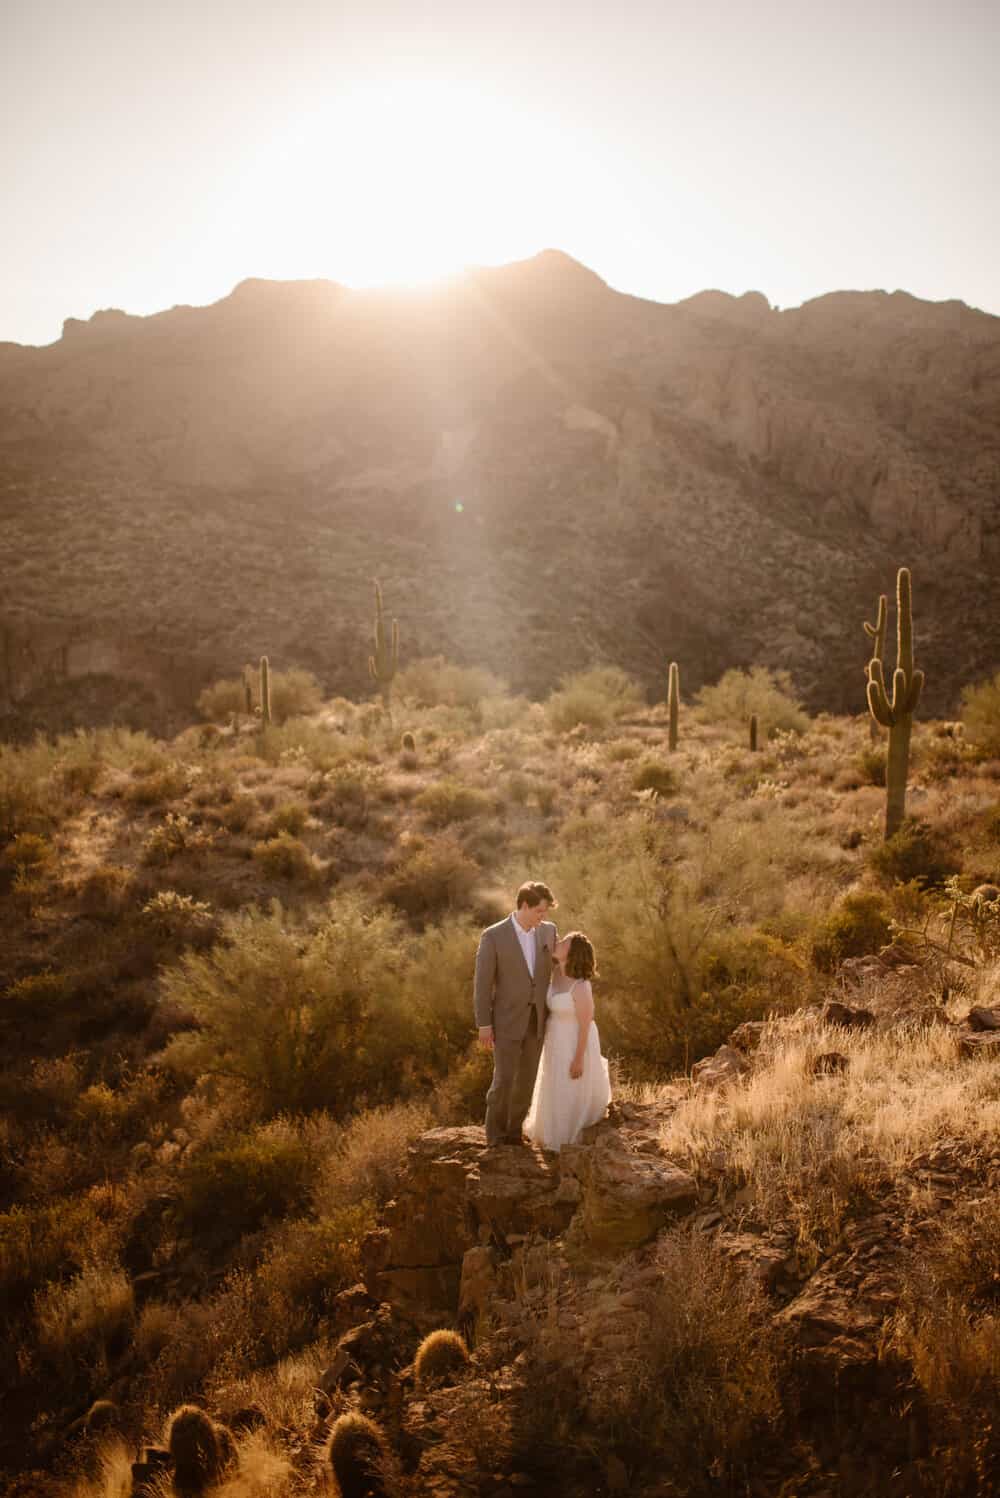 A couple stands in the desert together as the sun sets behind them.